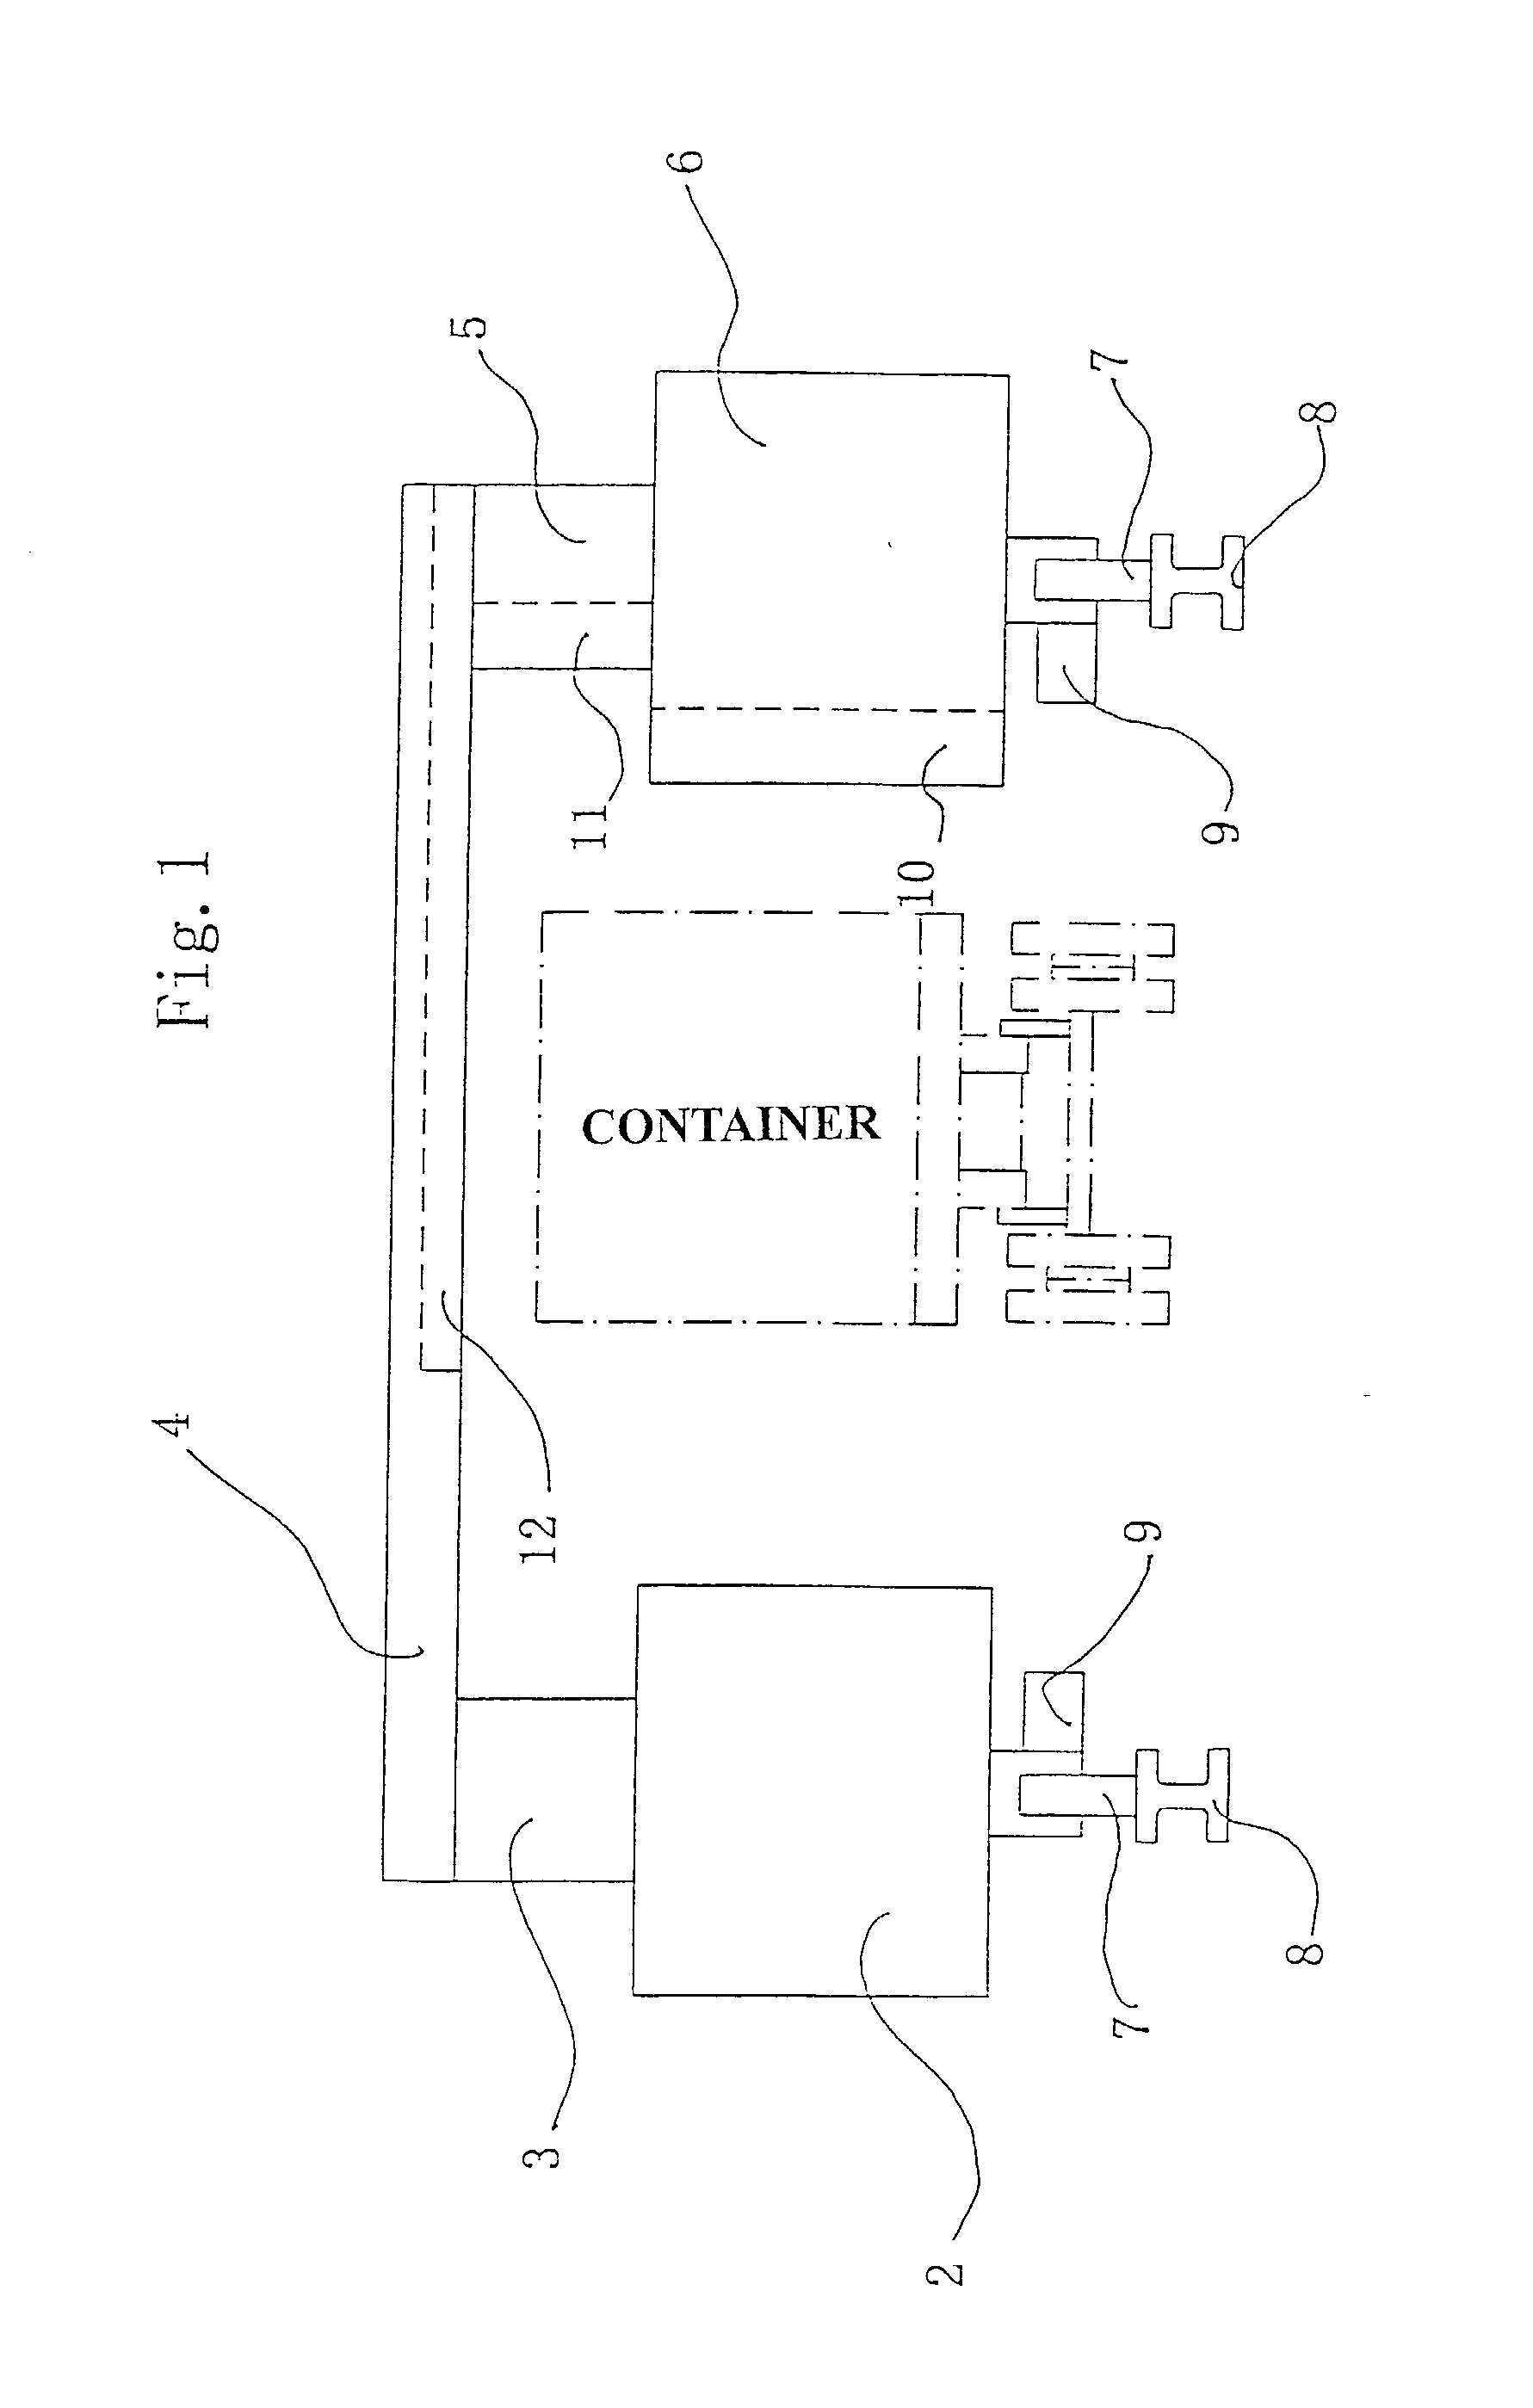 Container inspection apparatus